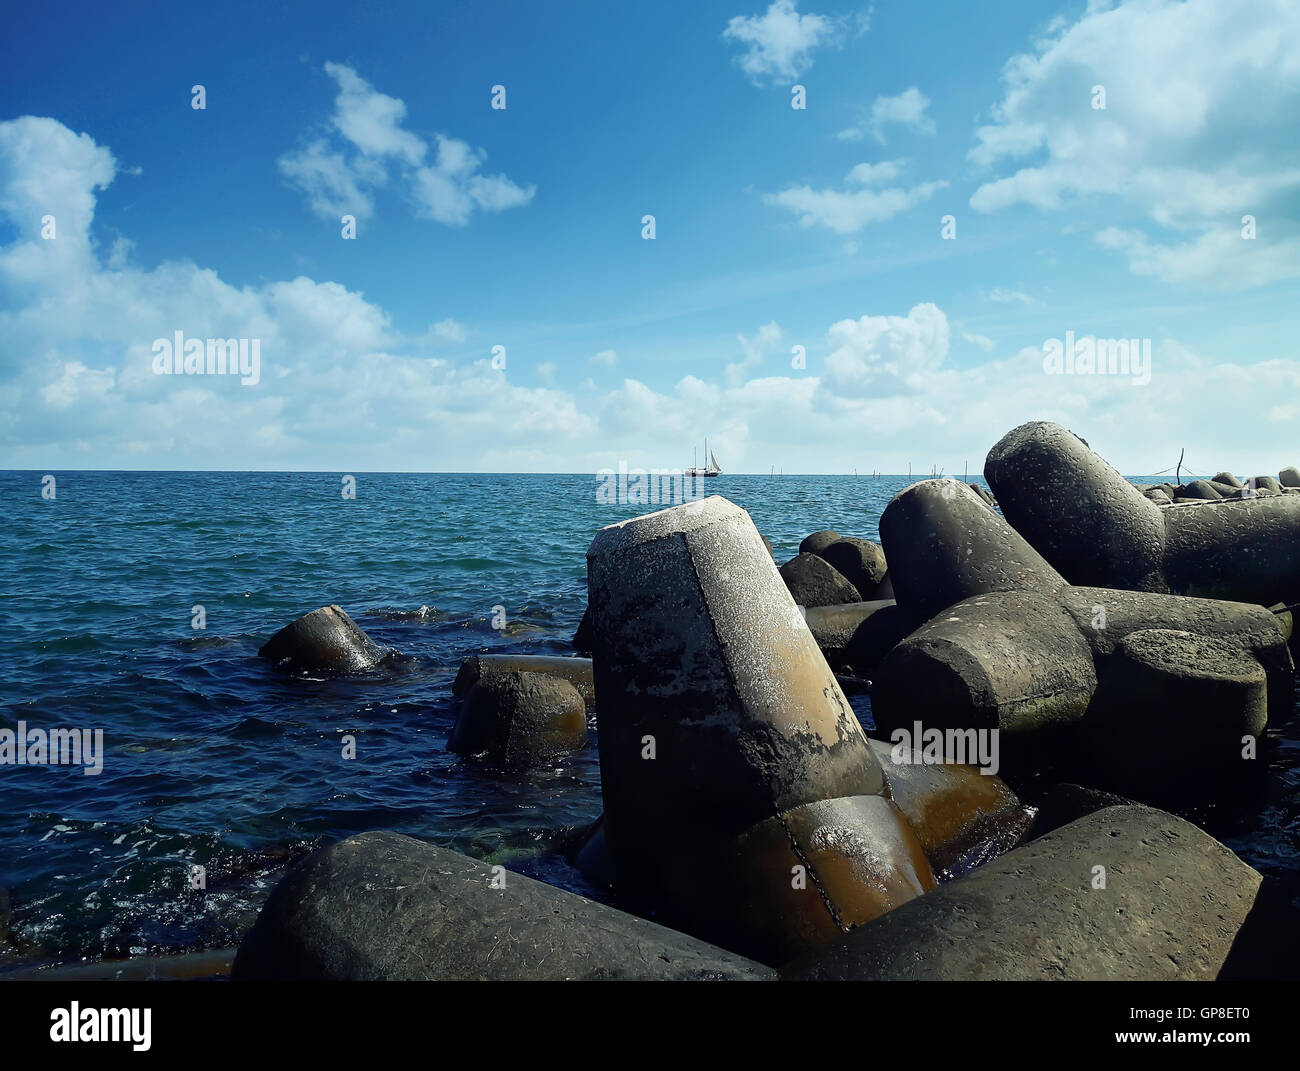 Huge stones in the sea water near the harbor at Balchik city, Bulgaria. Summer vacation background with a ship floating on far. Stock Photo